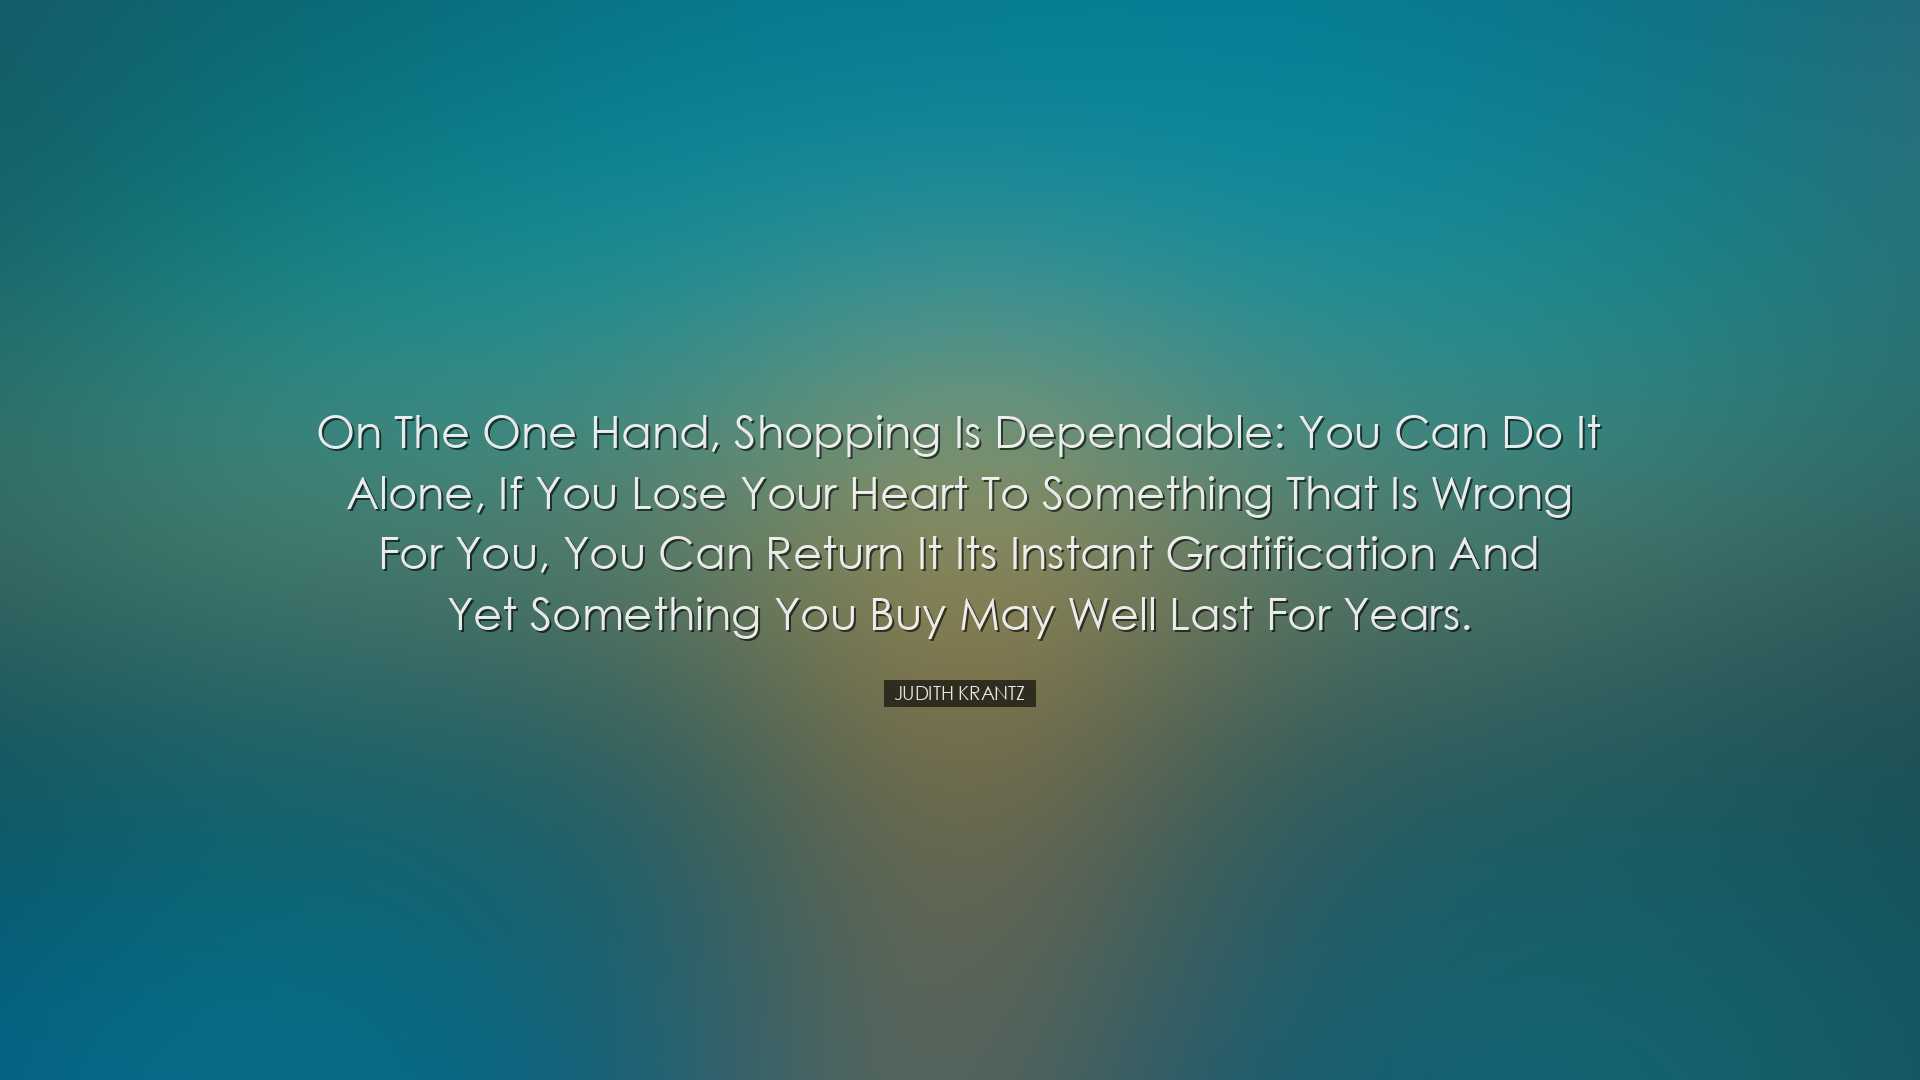 On the one hand, shopping is dependable: You can do it alone, if y